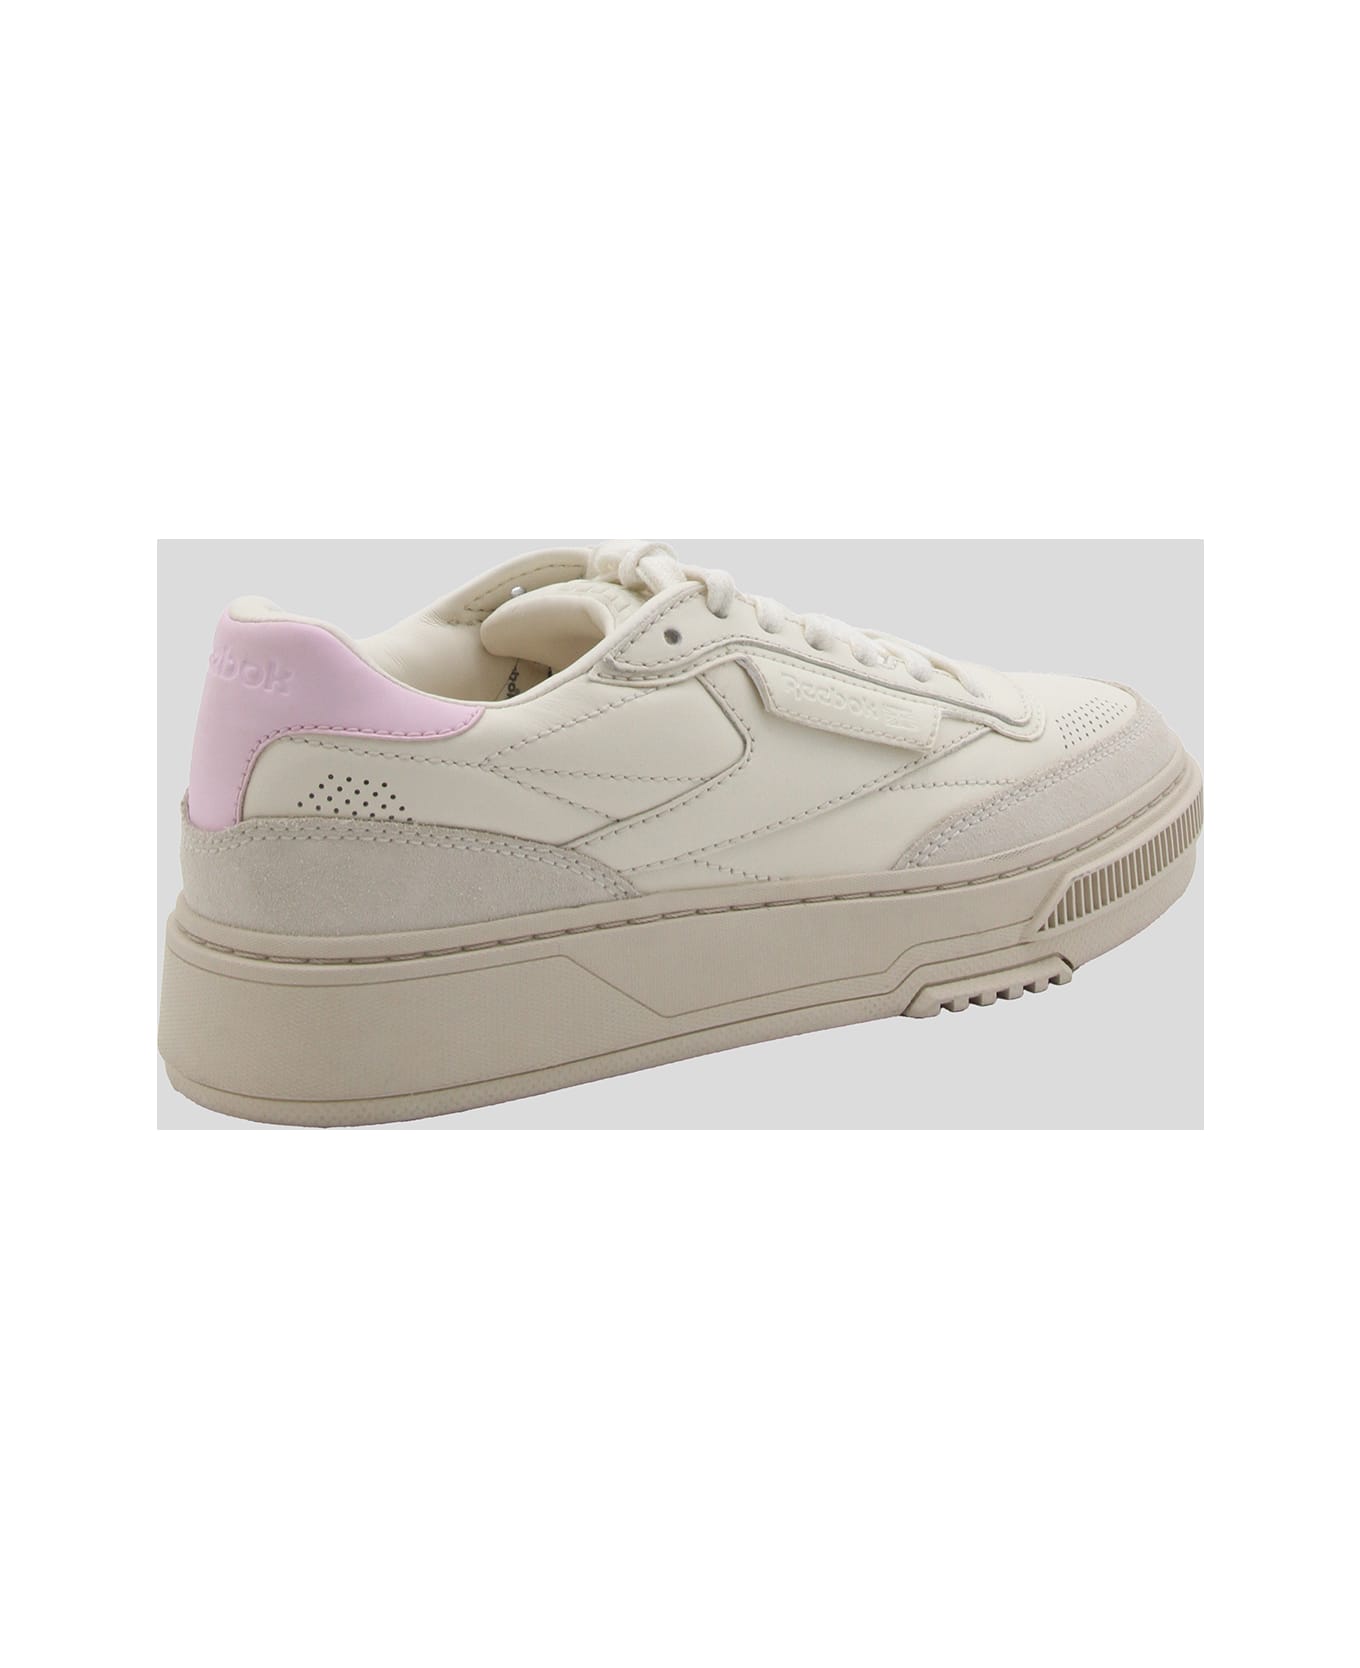 Reebok White And Pink Leather C Ltd Sneakers - WHITE/PINK スニーカー